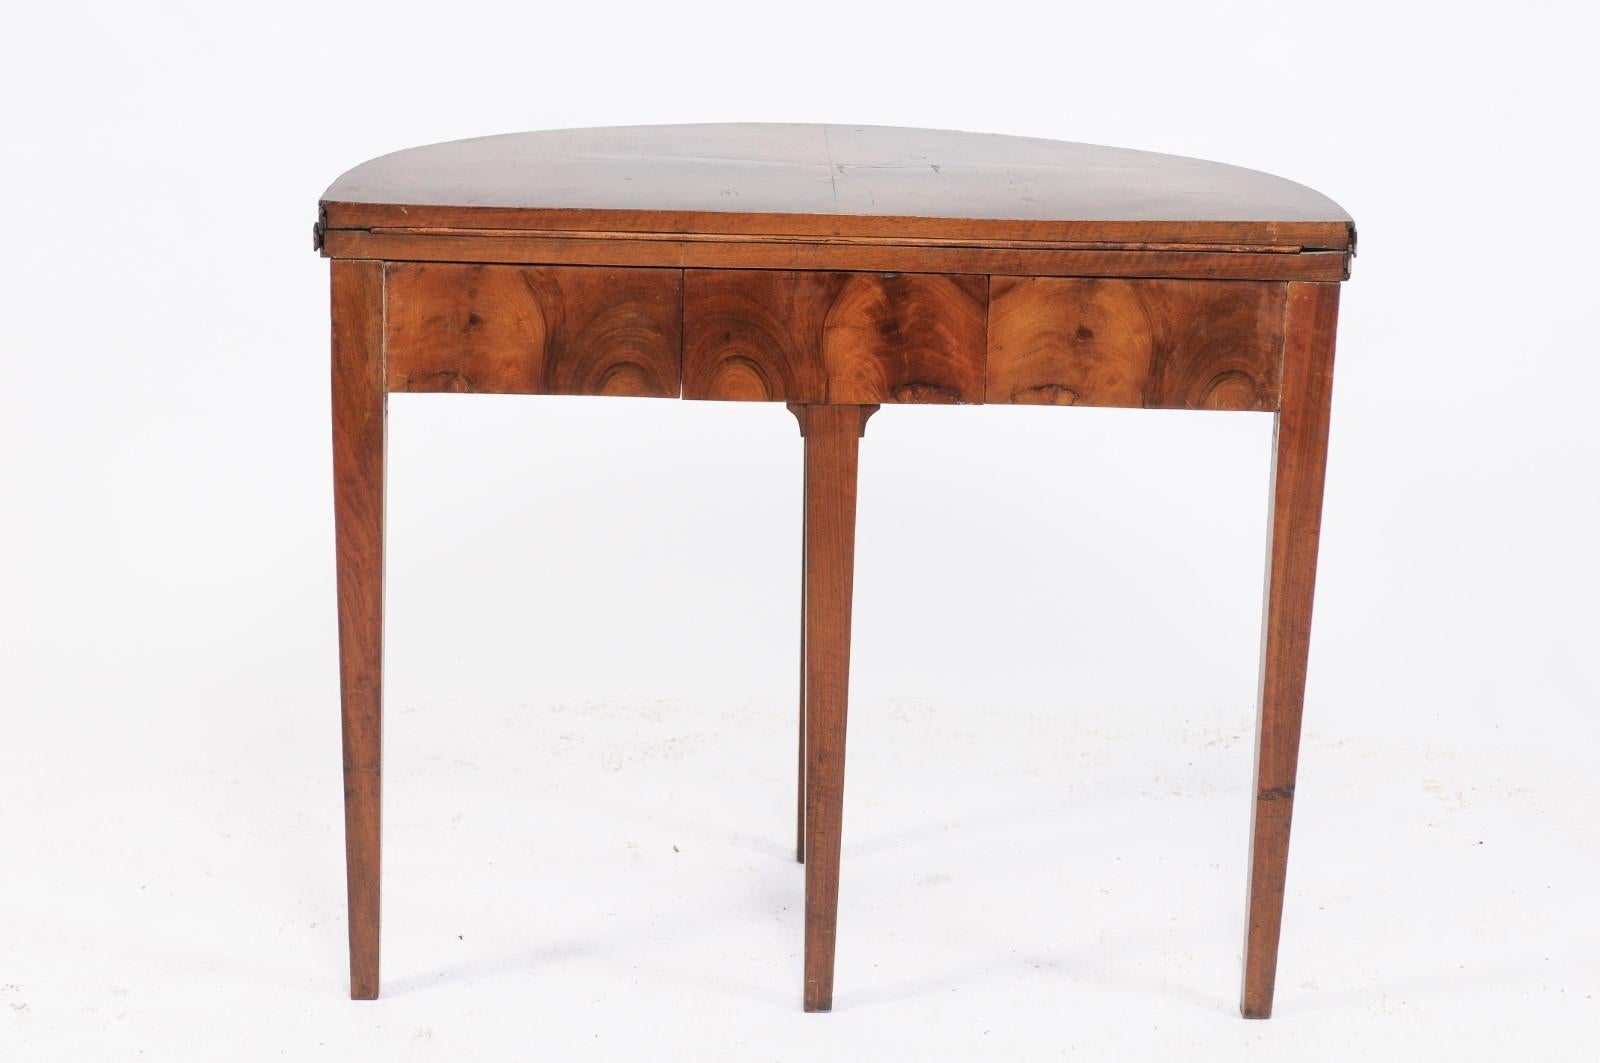 Veneer Directoire Style 1860s French Bookmarked Walnut Demilune Table with Leather Top